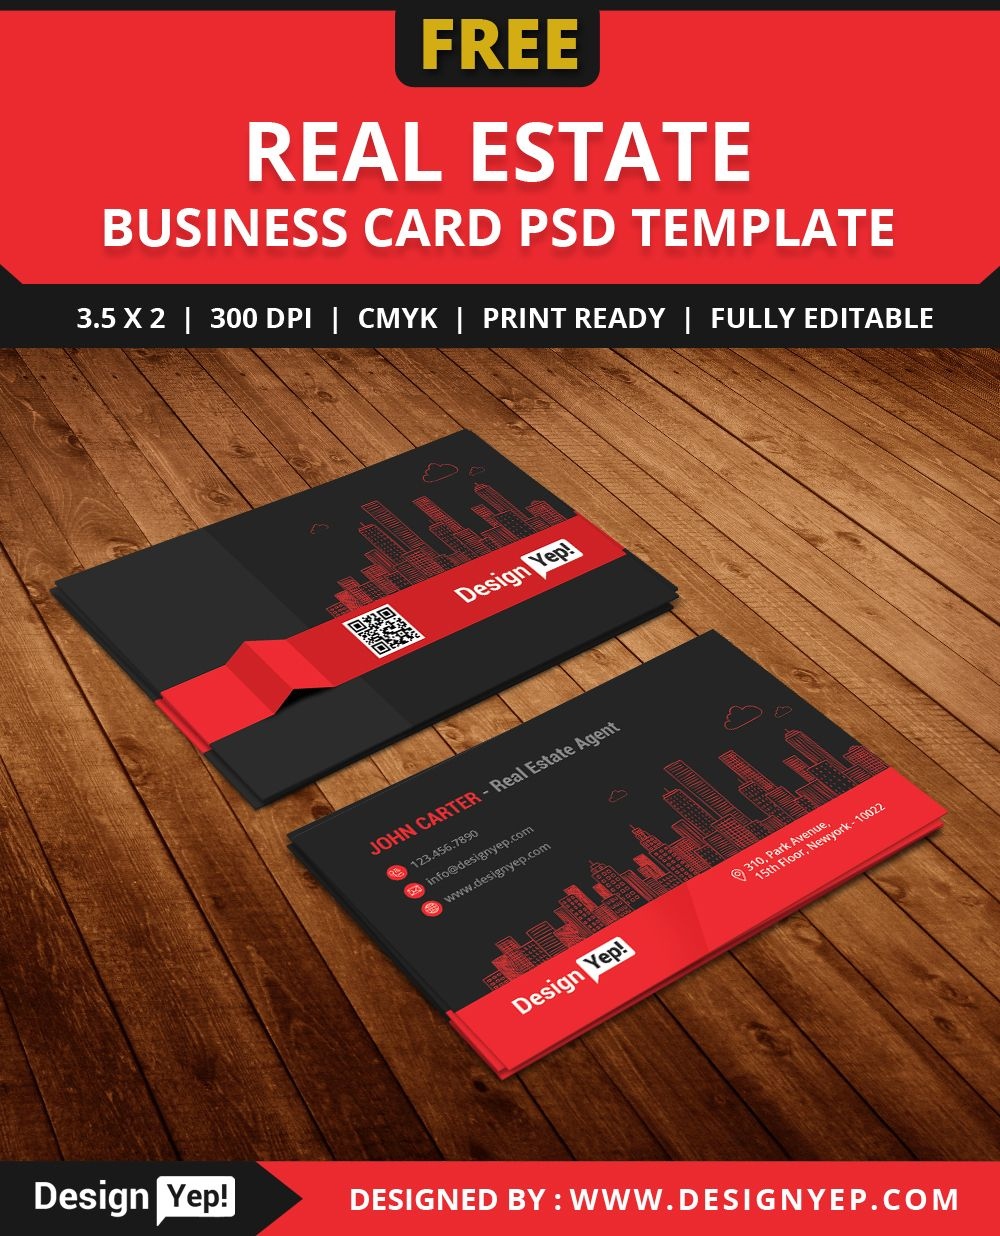 Free Real Estate Agent Business Card Template Psd | Free Intended For Real Estate Business Cards Templates Free